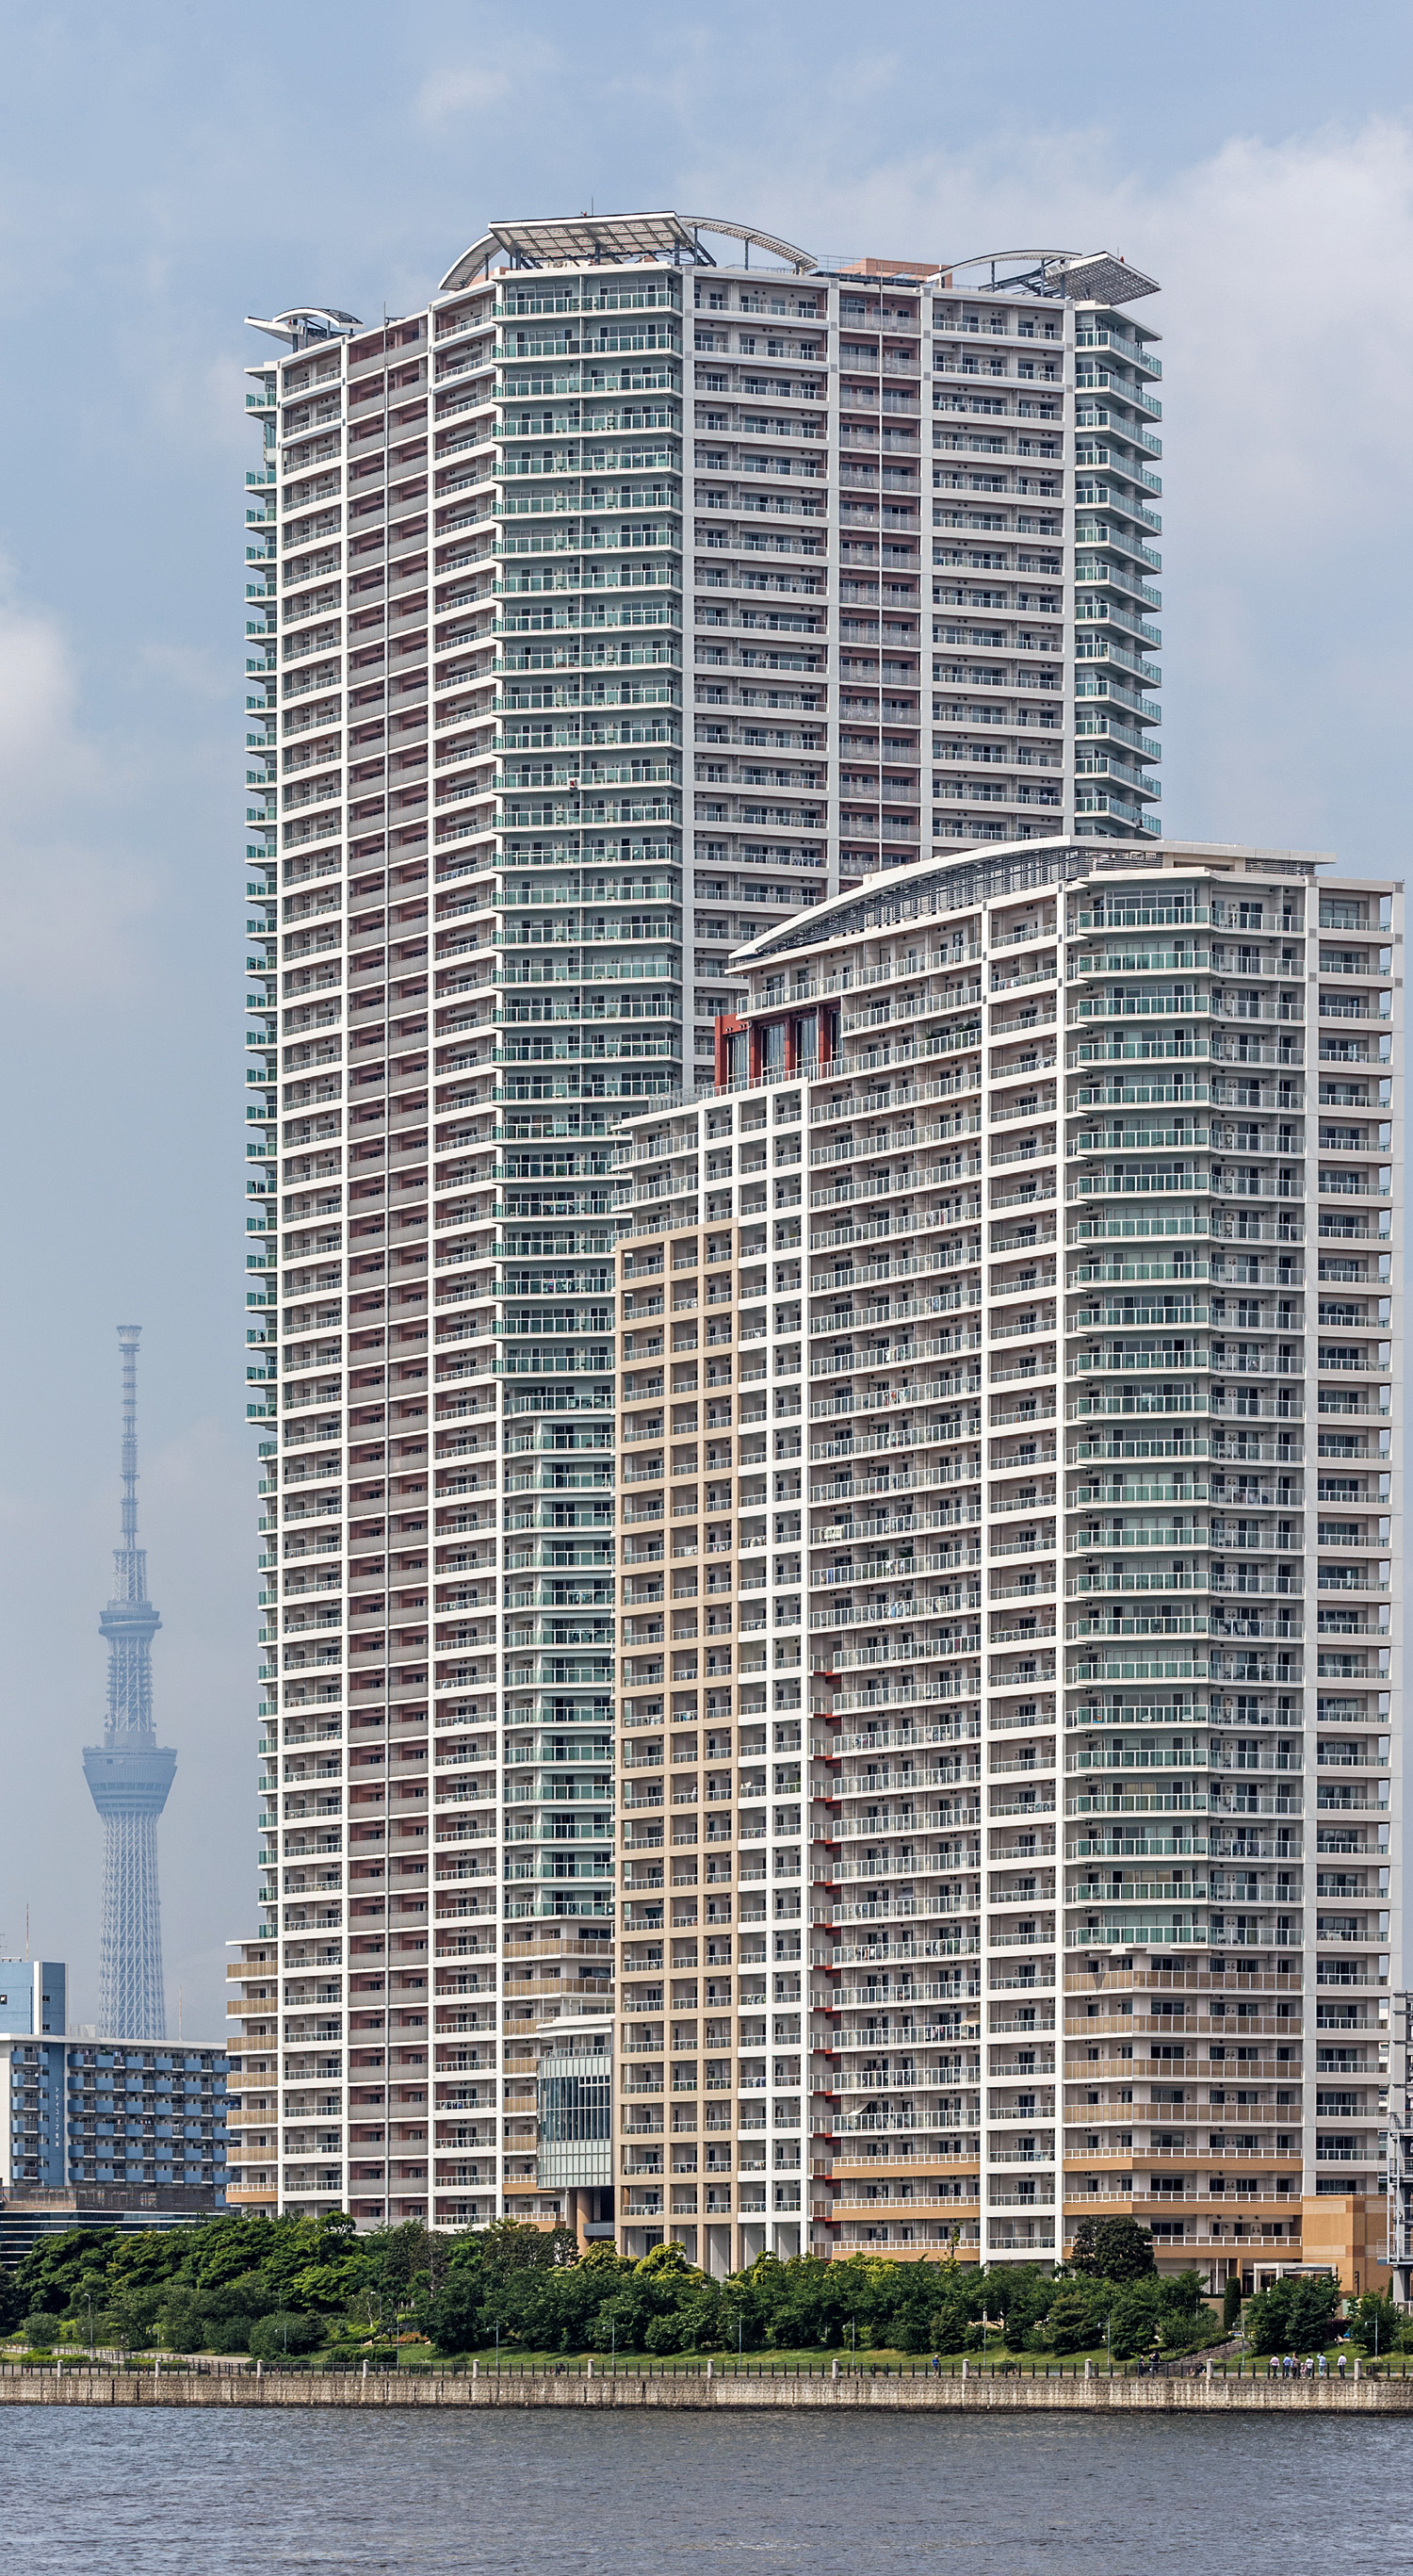 Park City Toyosu Building A, Tokyo - View from the south. © Mathias Beinling